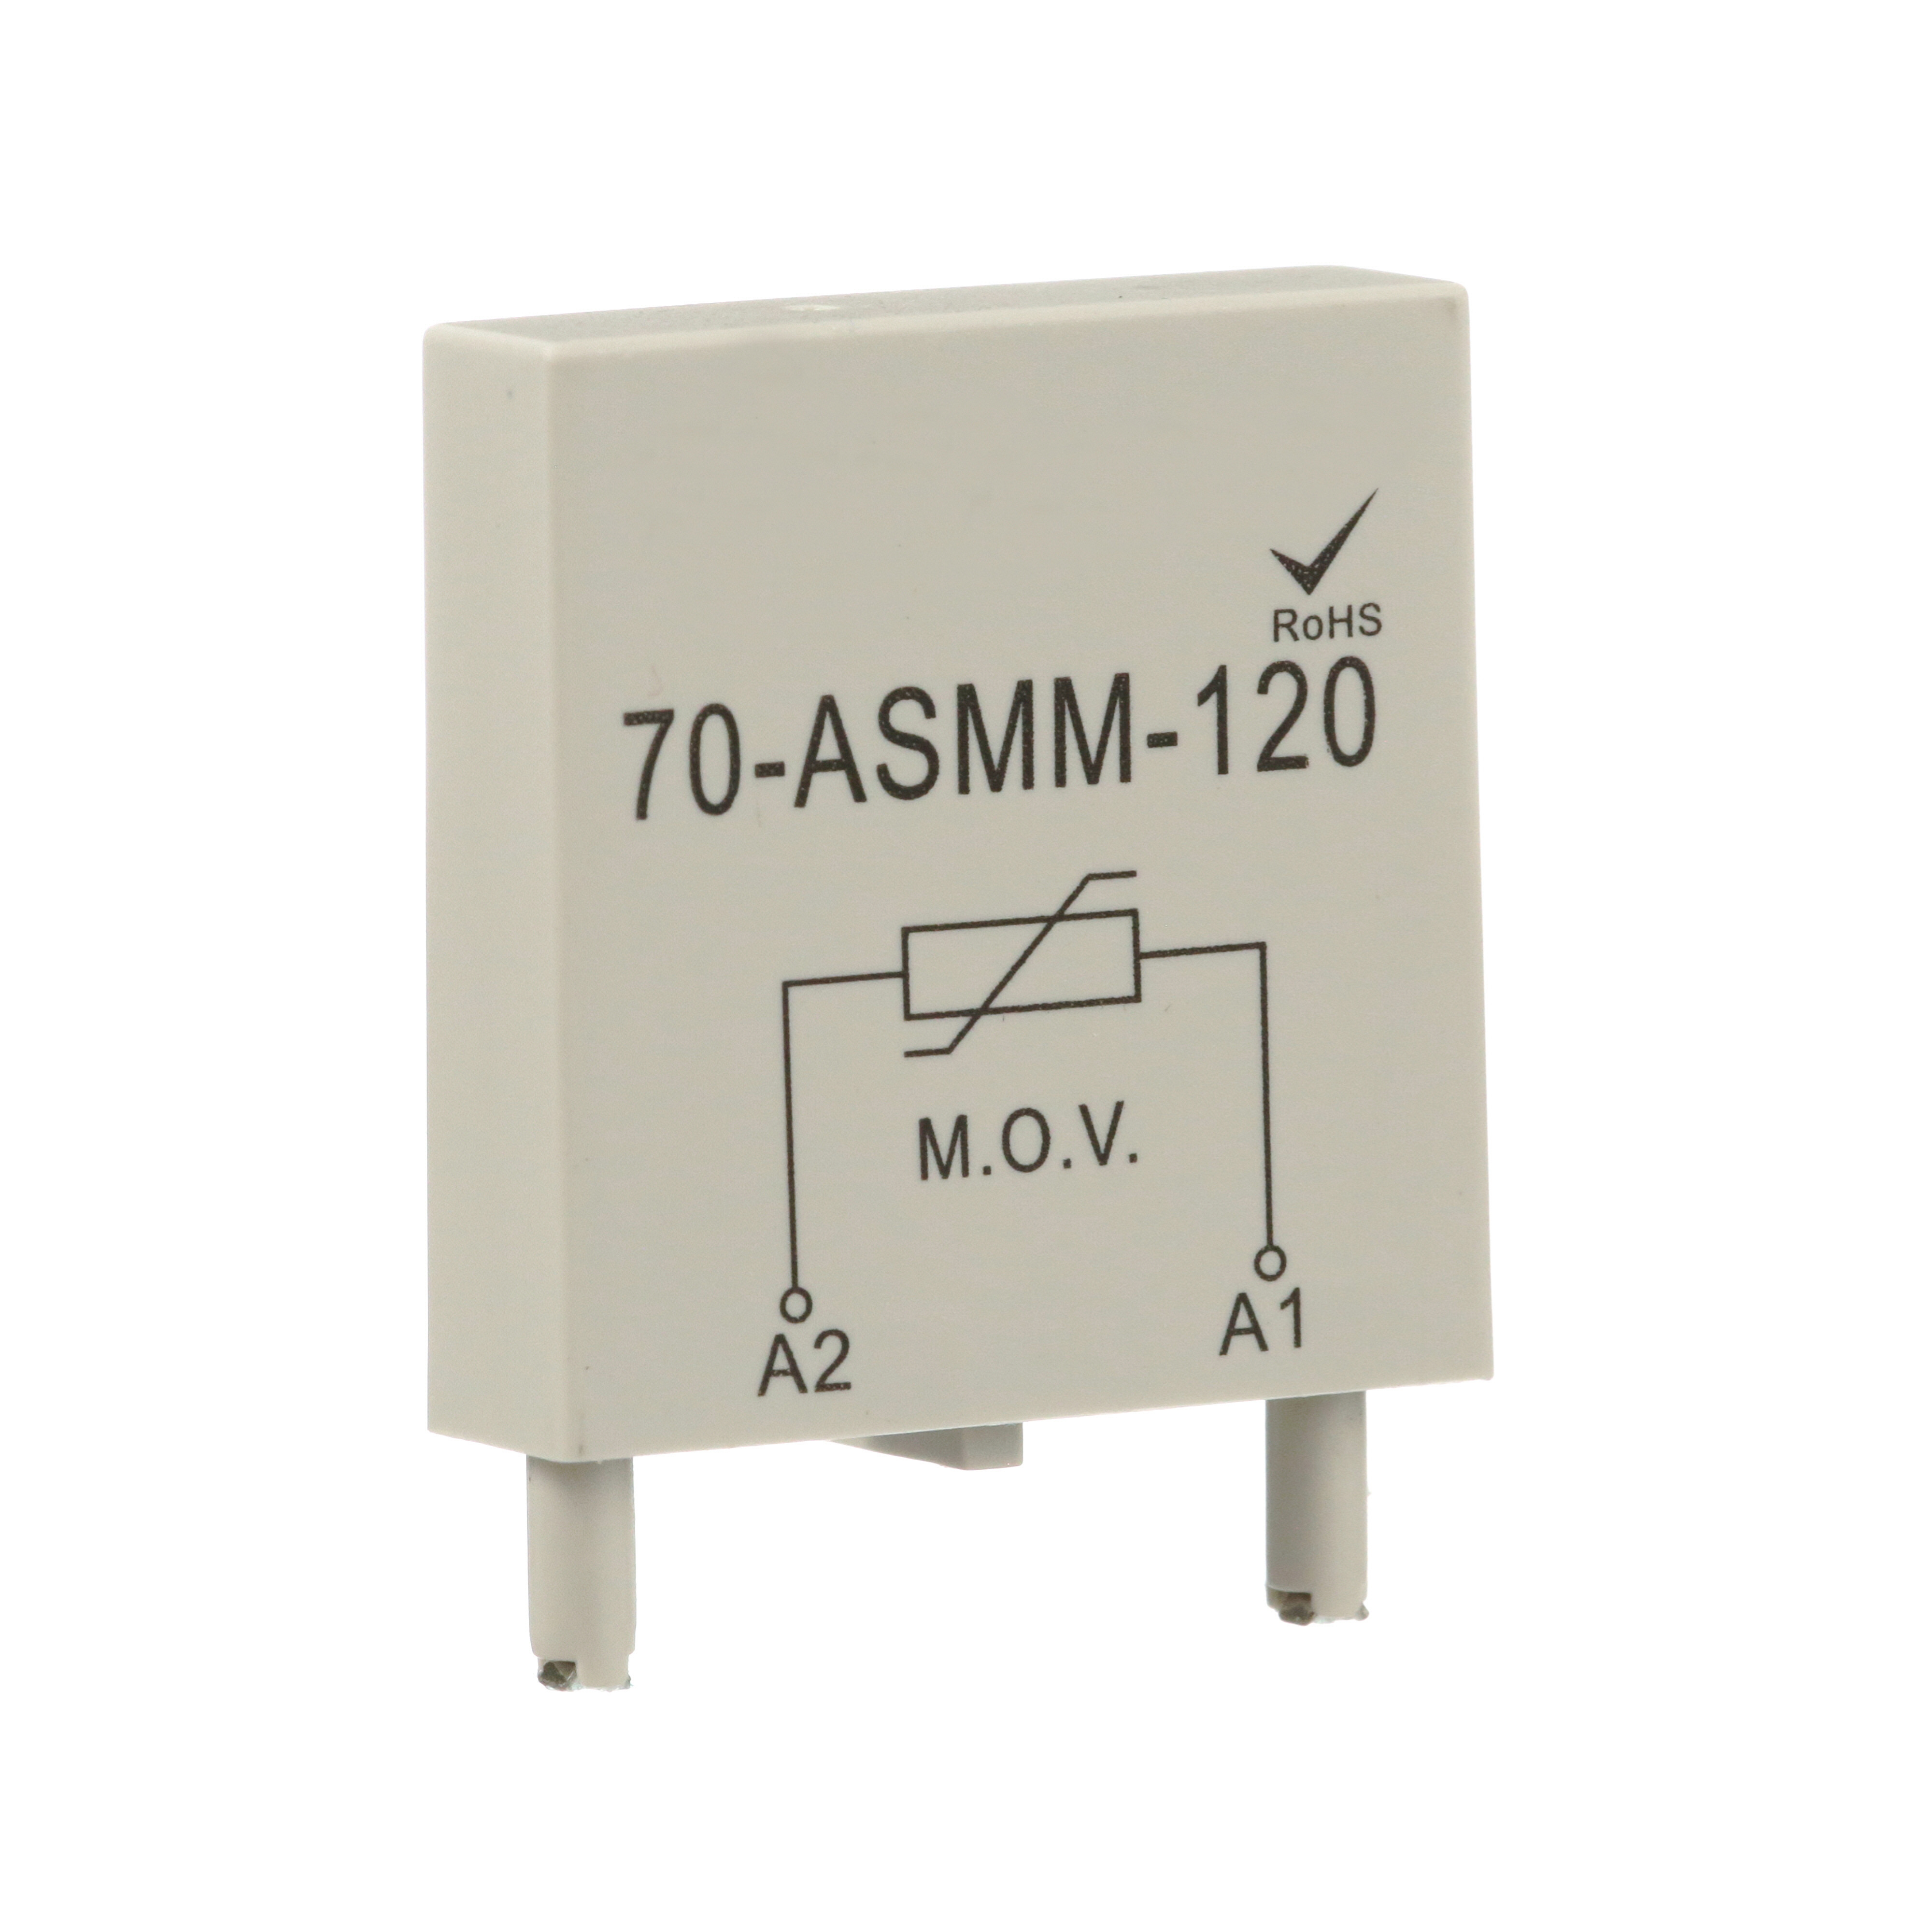 Protection module with MOV suppressor, SE Relays, for 725 power relays, 120V AC/V DC